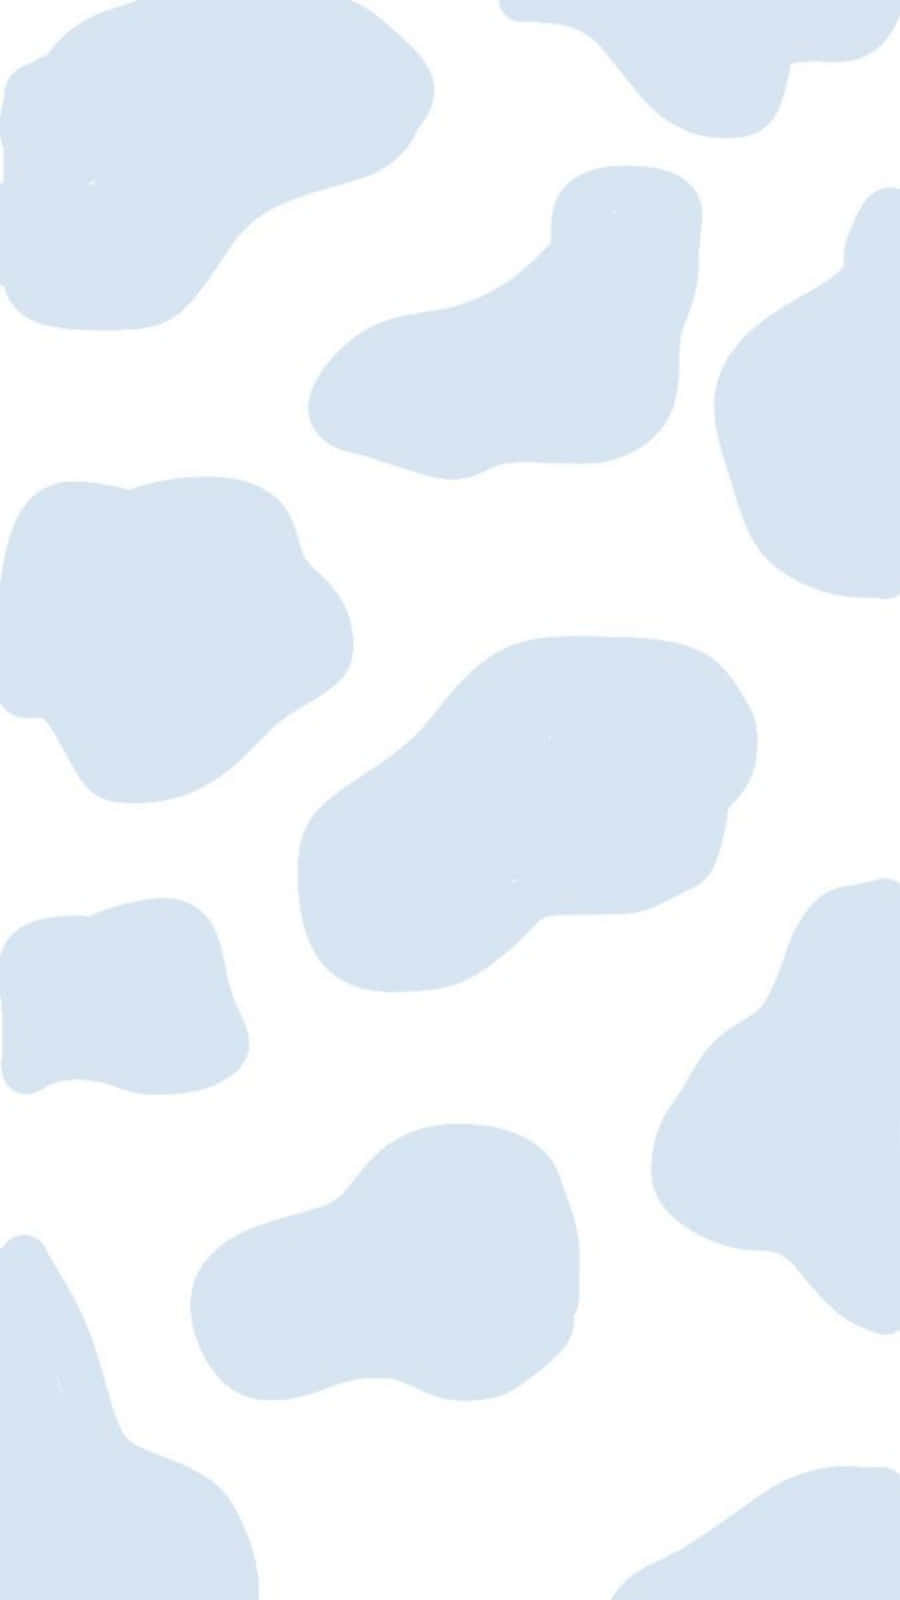 A White Cow with Blue Spots – Welcoming and Whimsical Wallpaper